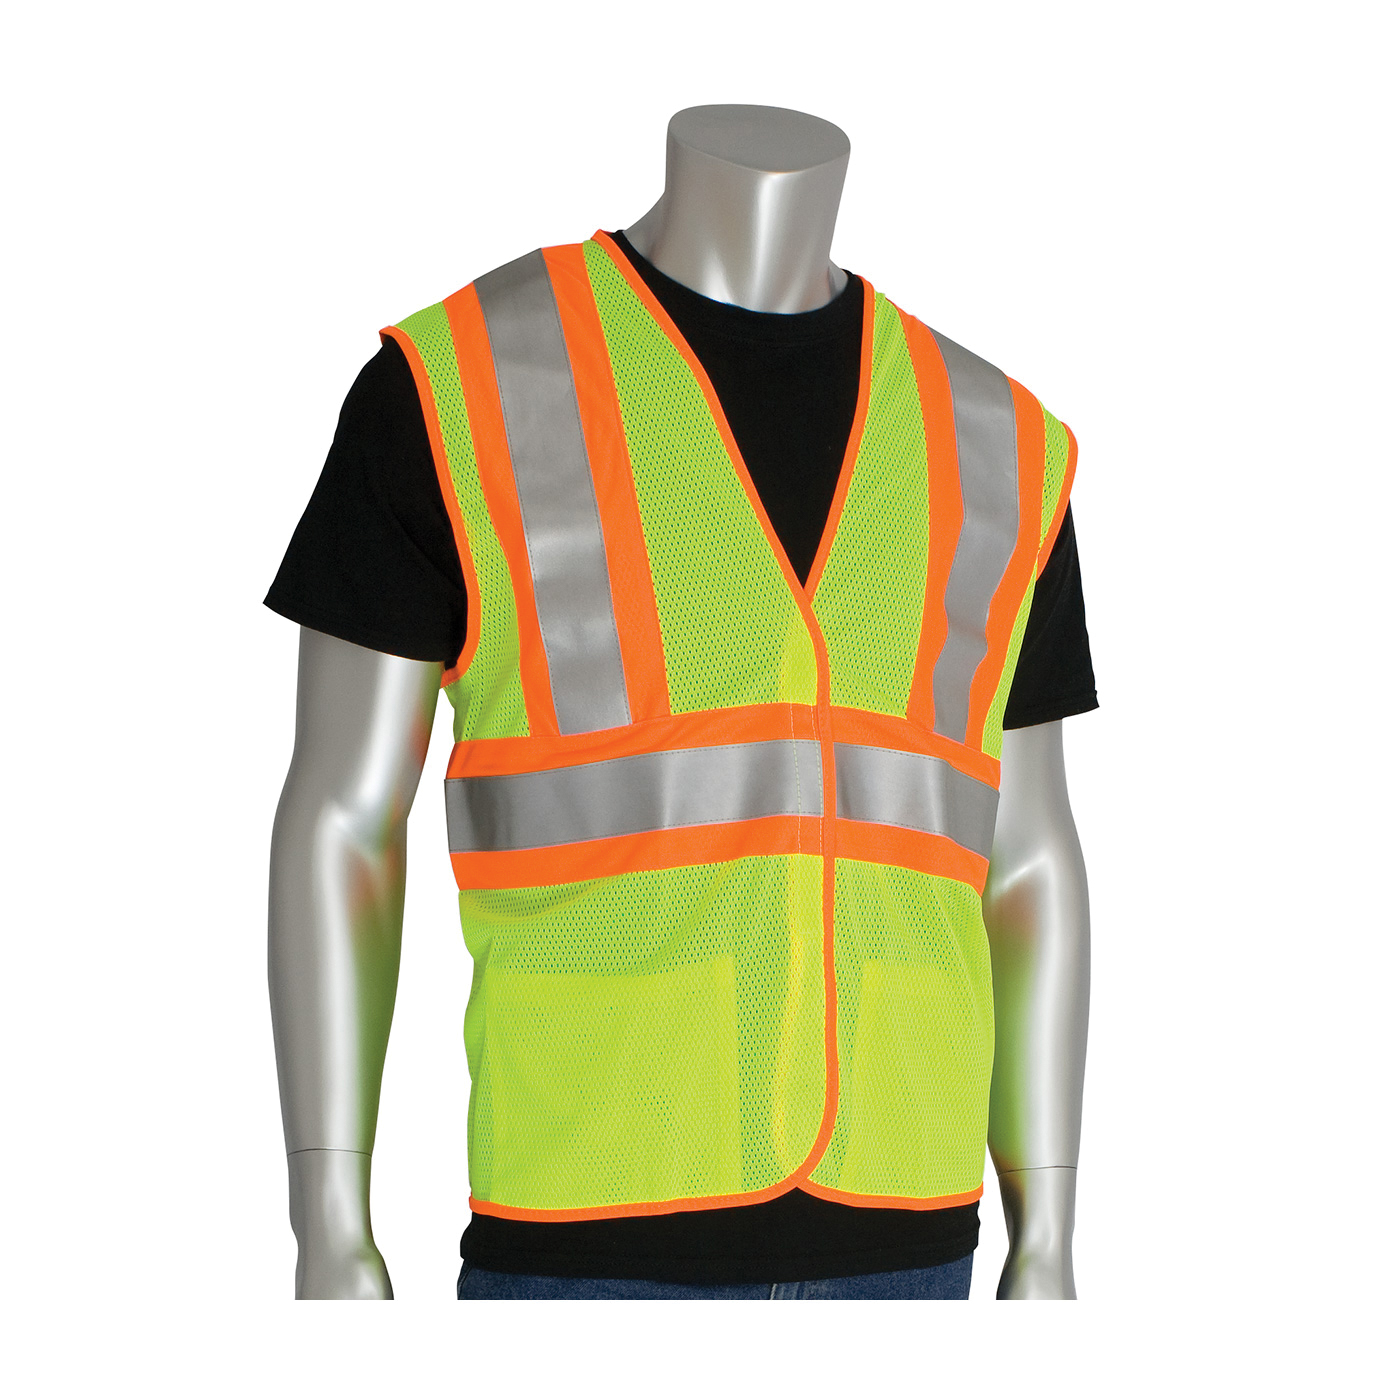 PIP® 305-MVFRLY-S/M 2-Tone FR Treated Safety Vest, S to M, Hi-Viz Lime Yellow, Polyester, Hook and Loop Closure, 2 Pockets, ANSI Class: Class 2, ANSI Specified